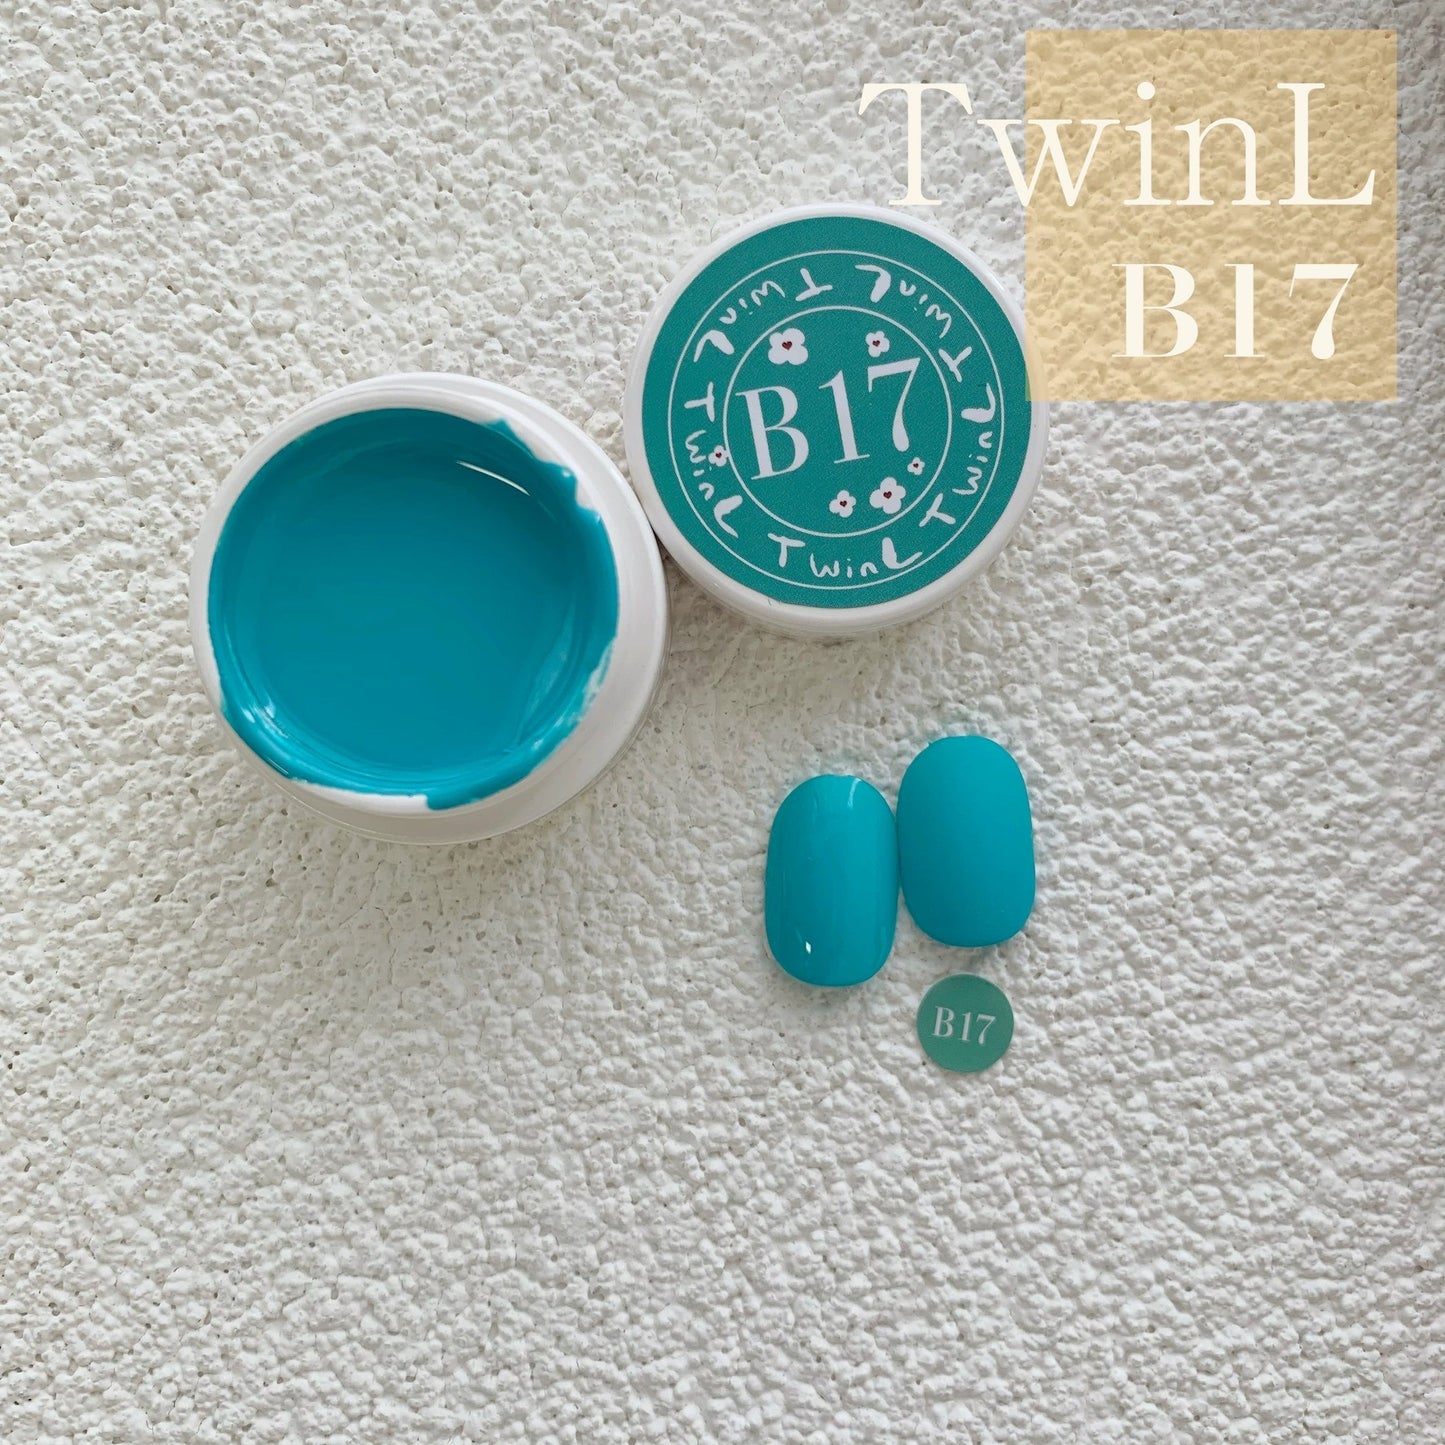 Radiant Glow Summer Collection B13-K24 TwinL Nail Gel